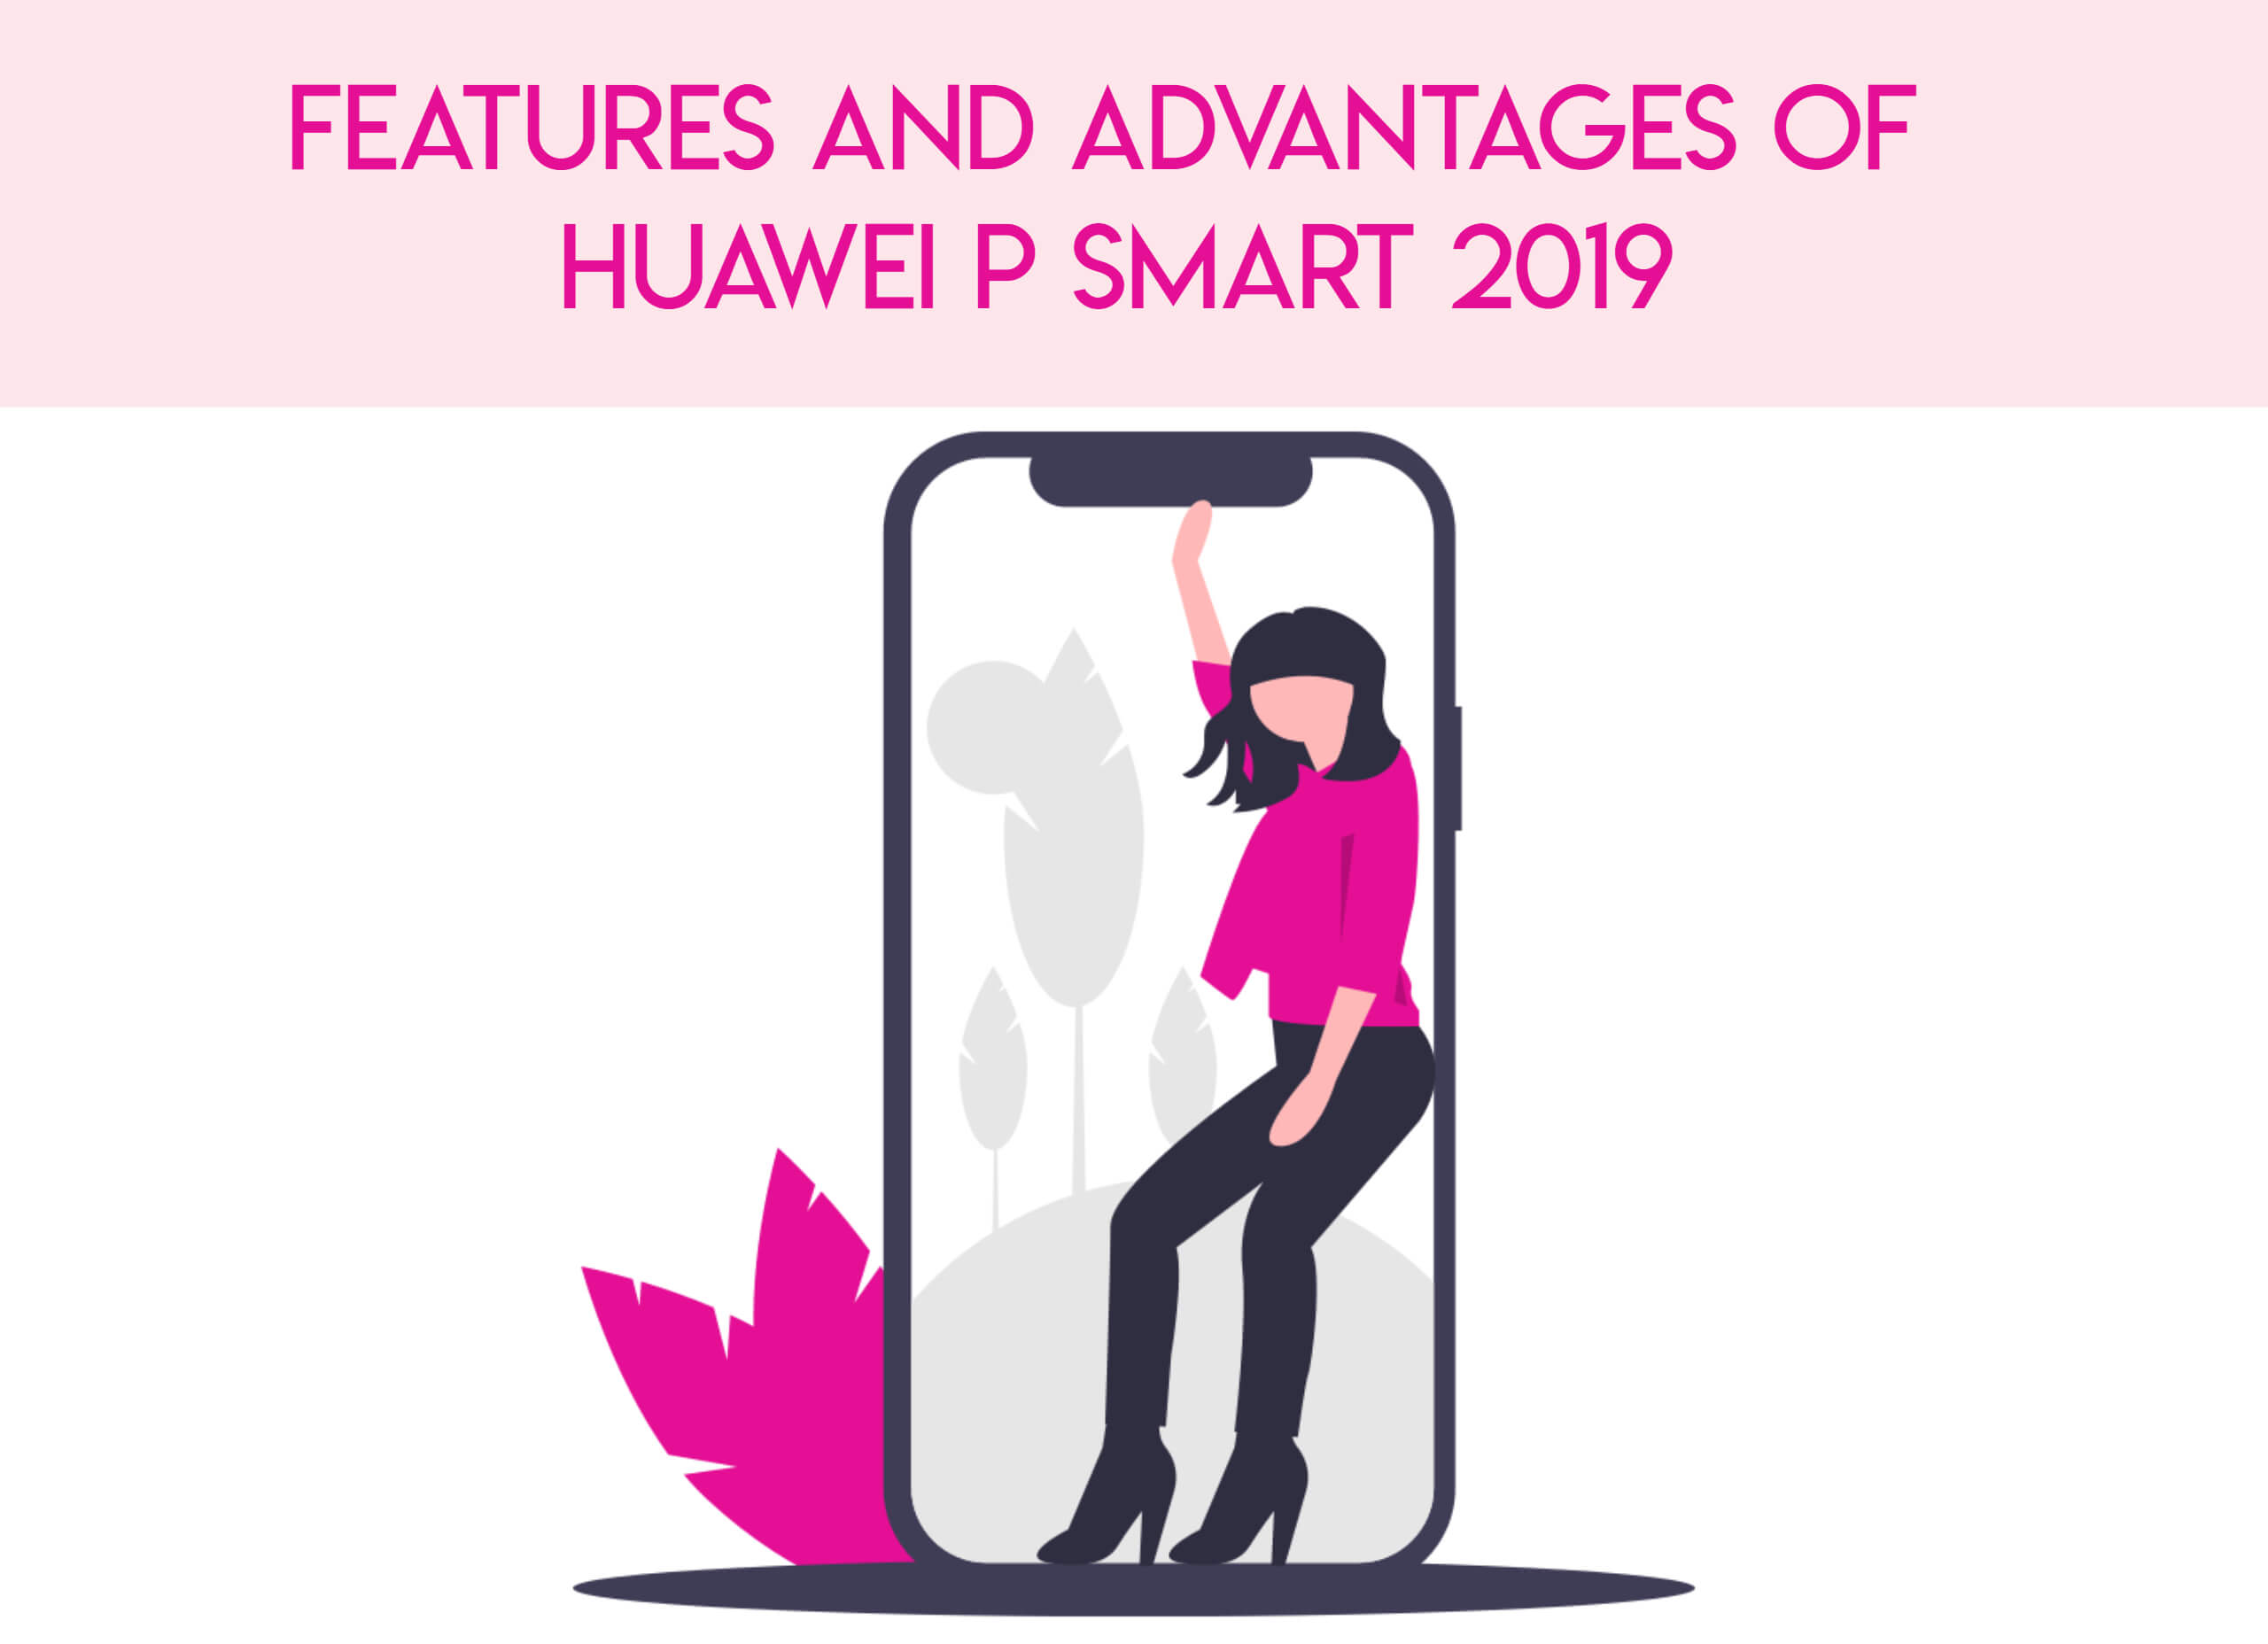 What Are The Features And Advantages Of Huawei P Smart 2019?